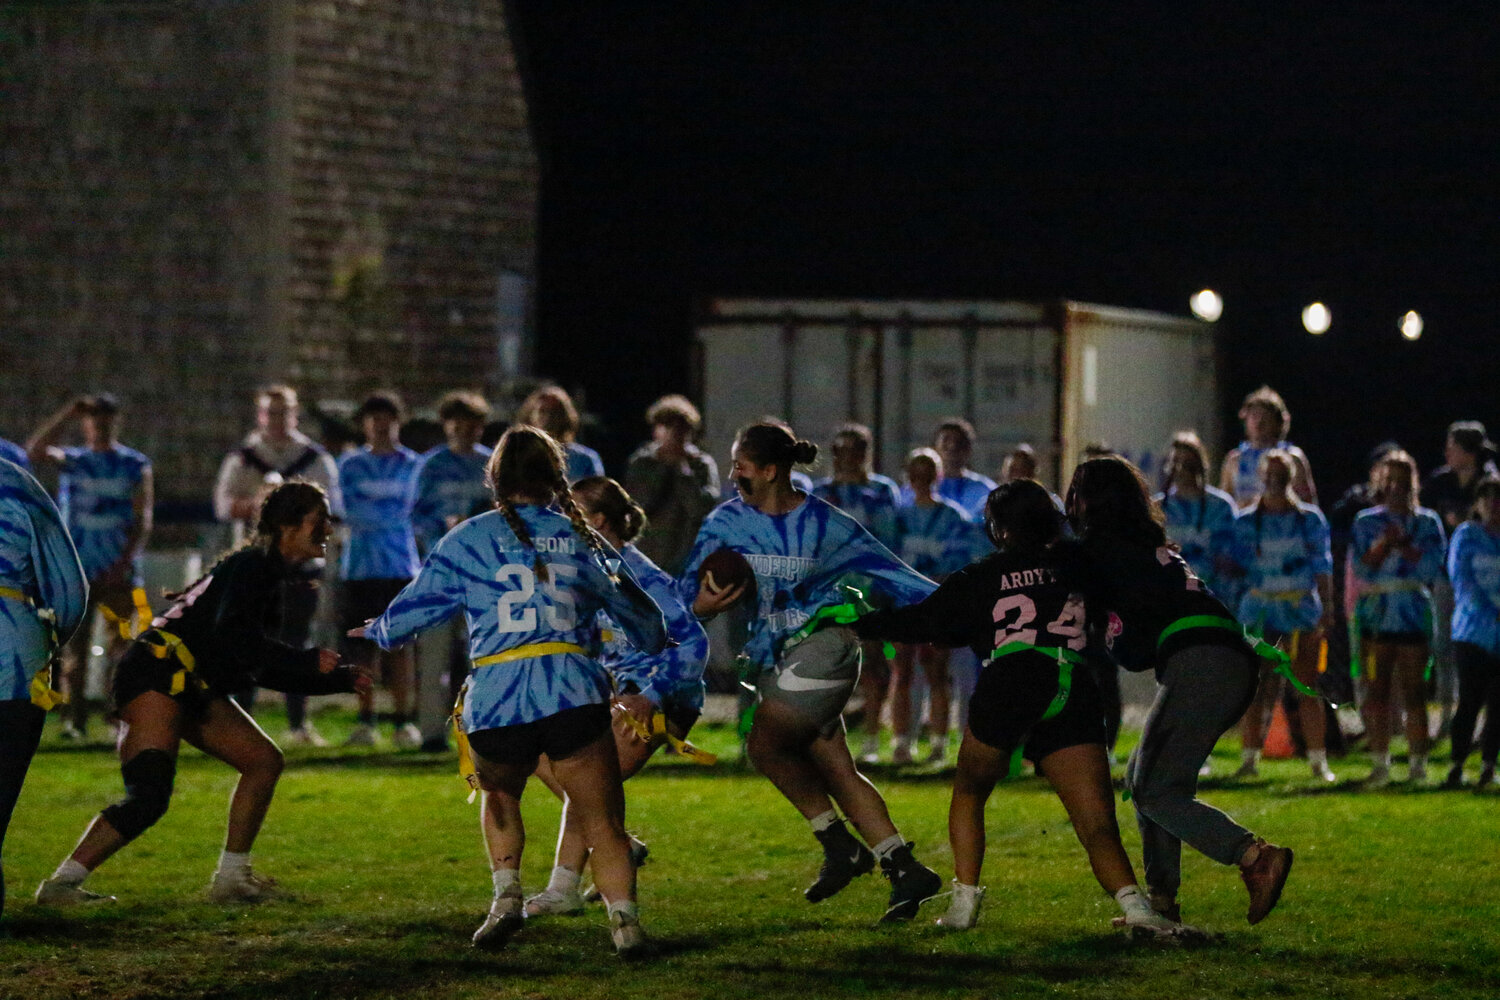 The seniors beat the juniors in Thursday's Powder Puff flag football game, marking the beginning of Homecoming Weekend.